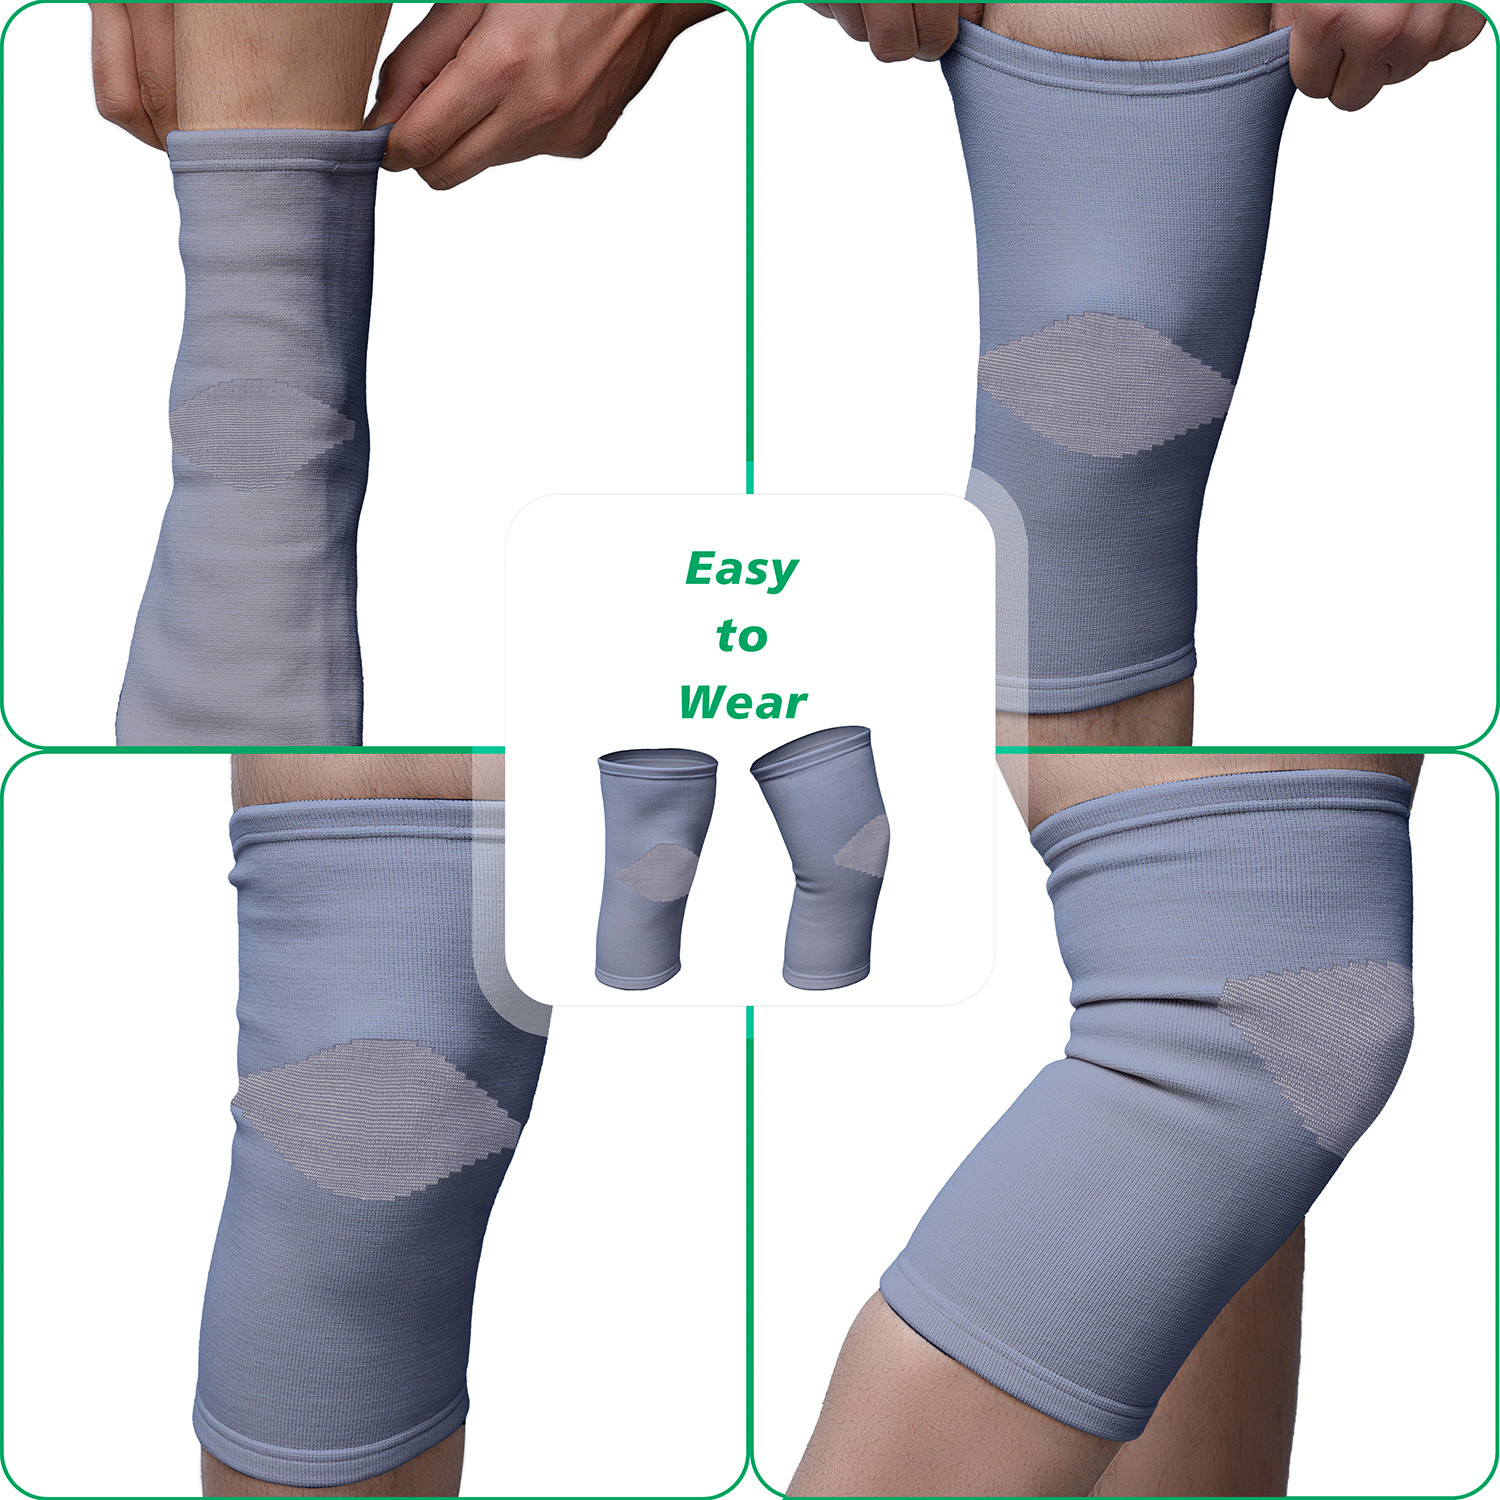 Kuber Industries 3D Knee Cap | Cotton Knee Sleeves |Sleeves For Joint Pain | Sleeves For Arthritis Relief | Unisex Knee Wraps | Knee Bands |Size-XL | 1 Pair | Gray & White